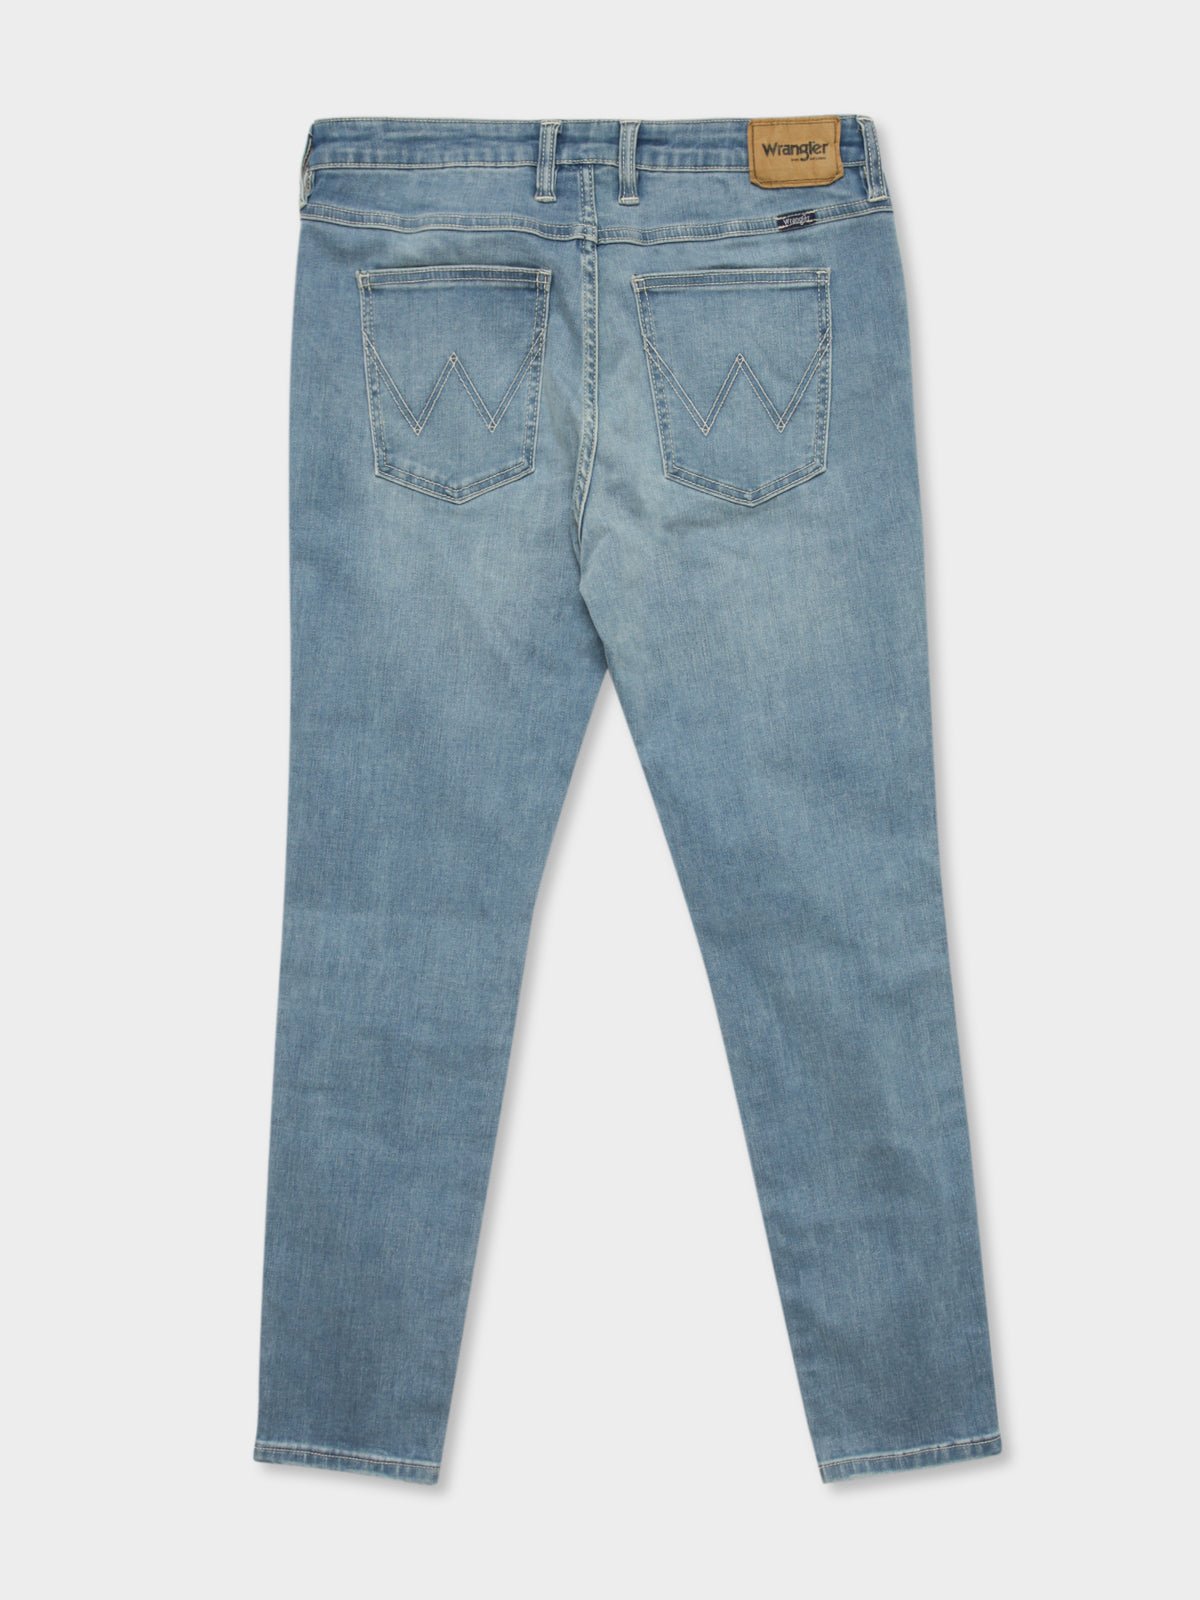 Mid Pins Jeans in Simple Dreams Blue